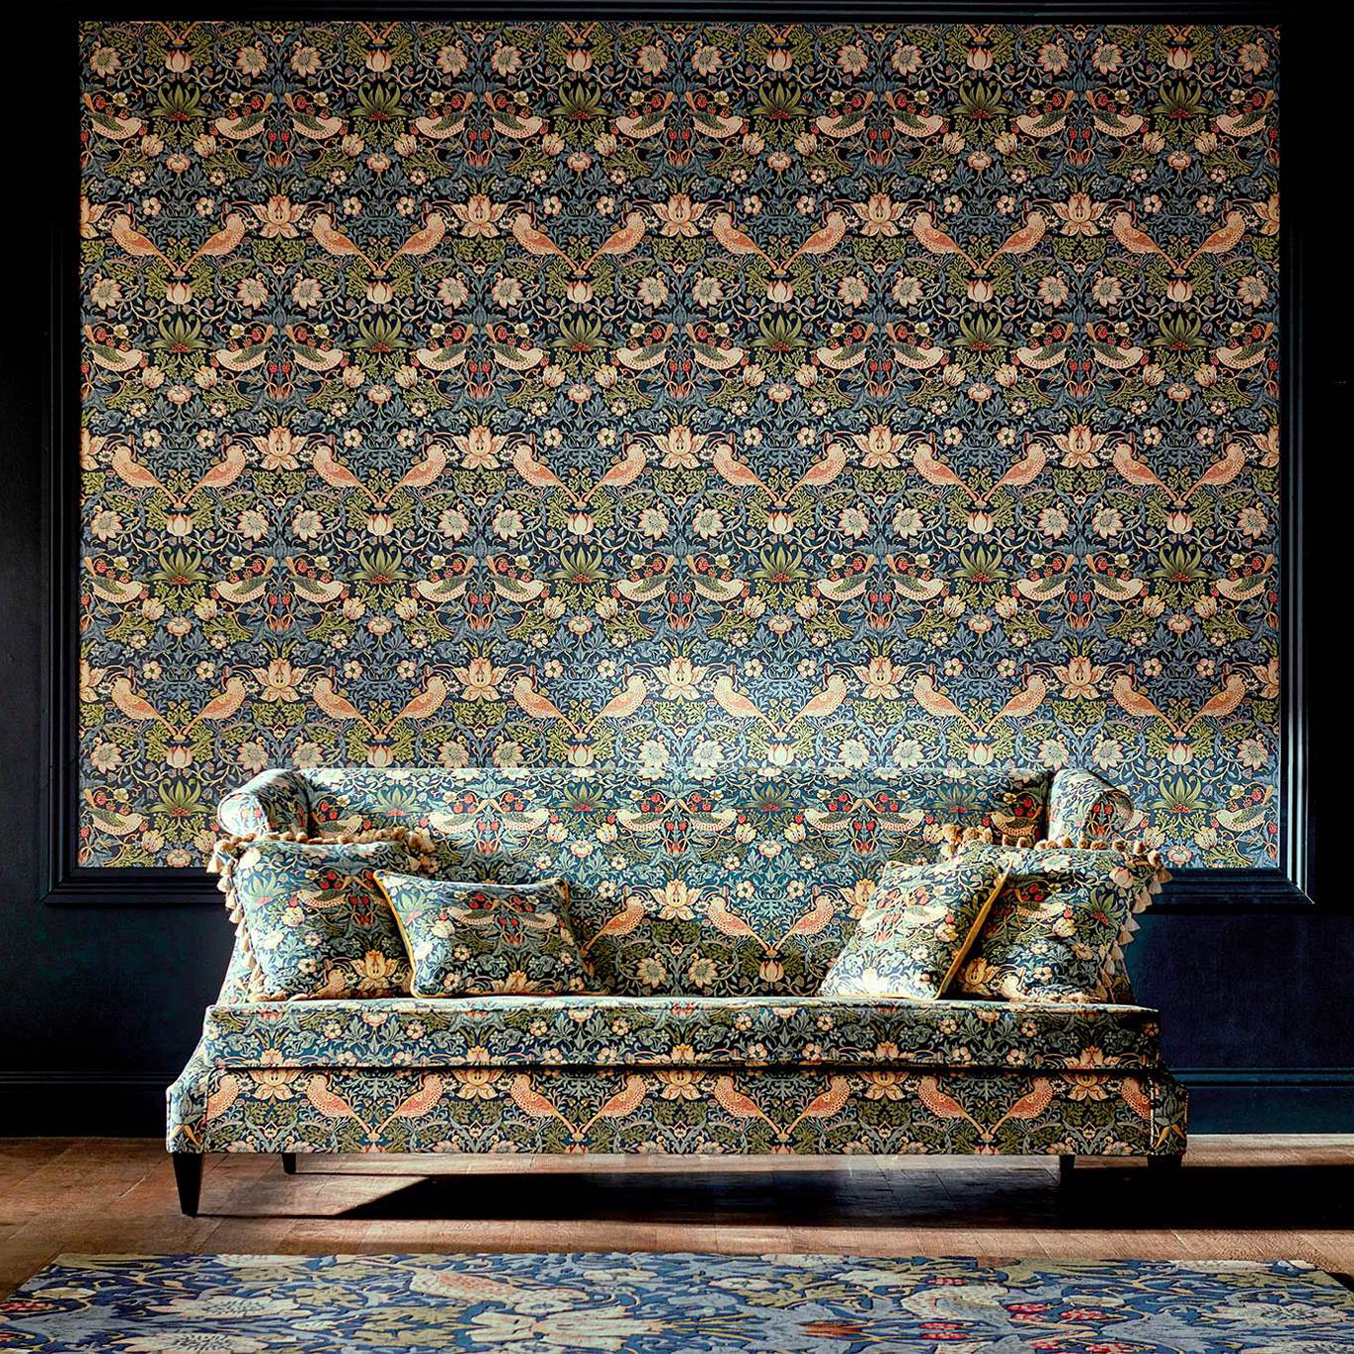 The Enduring Legacy of William Morris and the Arts and Crafts Movement